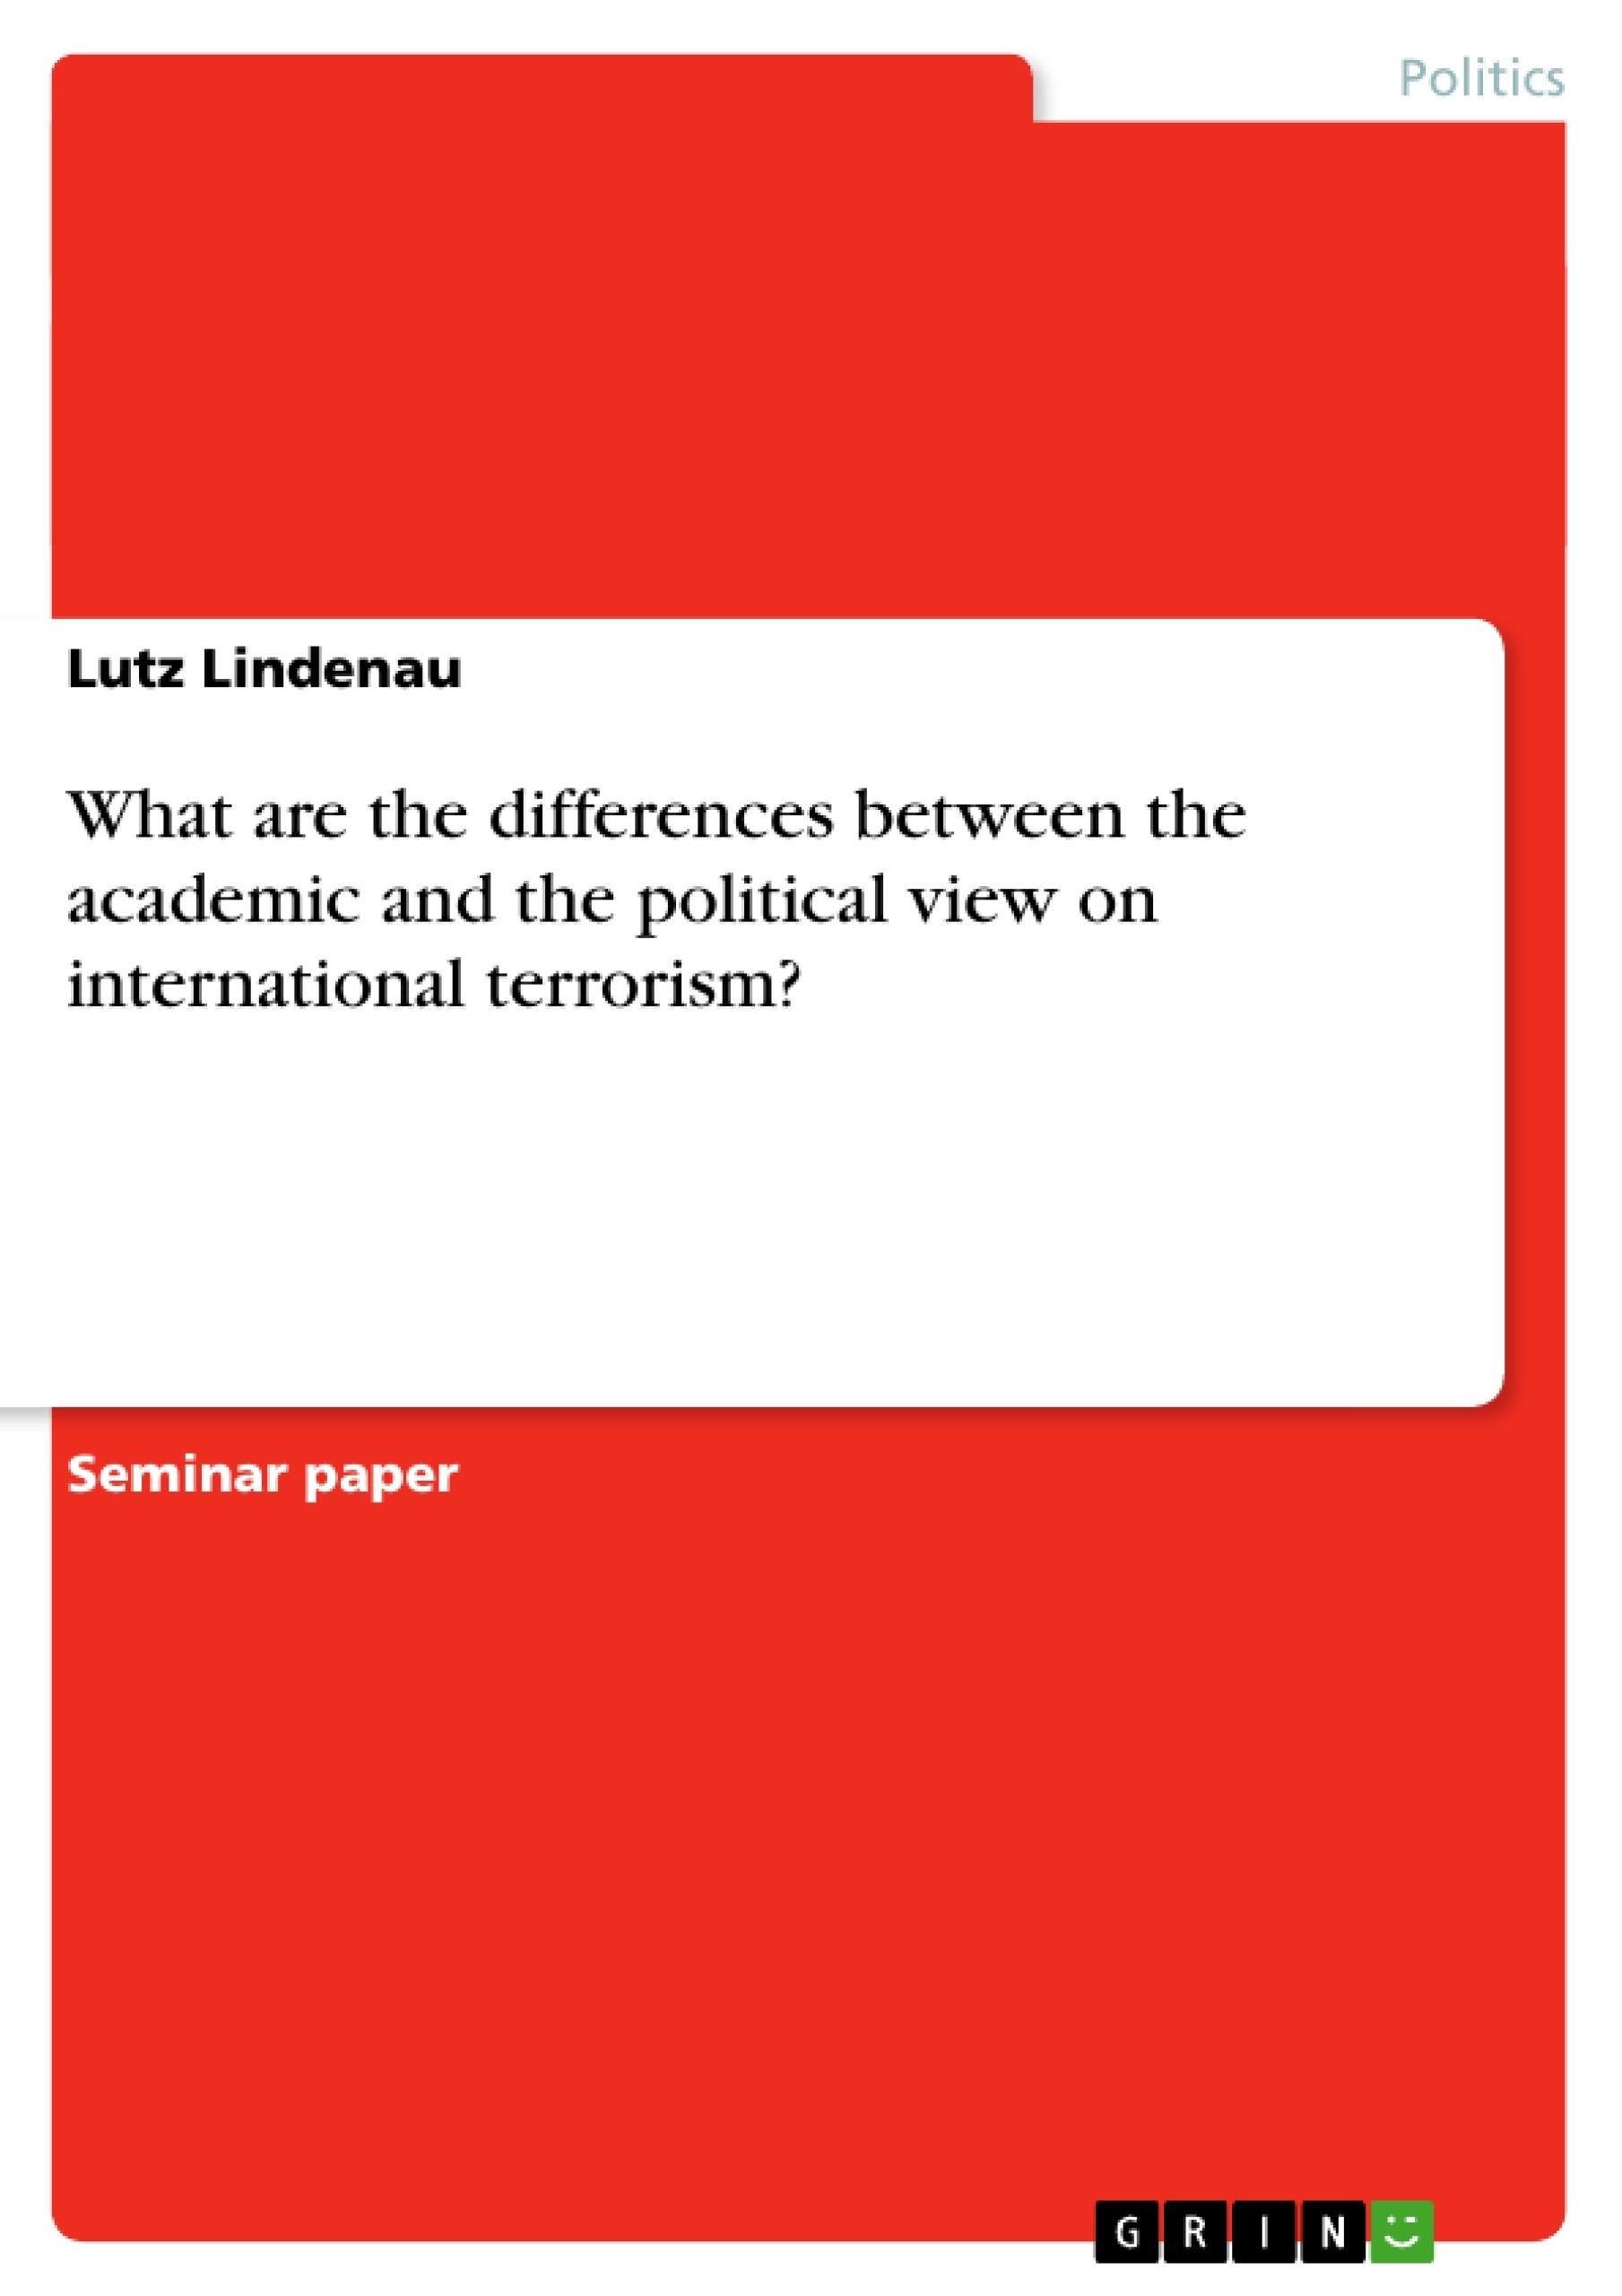 Título: What are the differences between the academic and the political view on international terrorism?